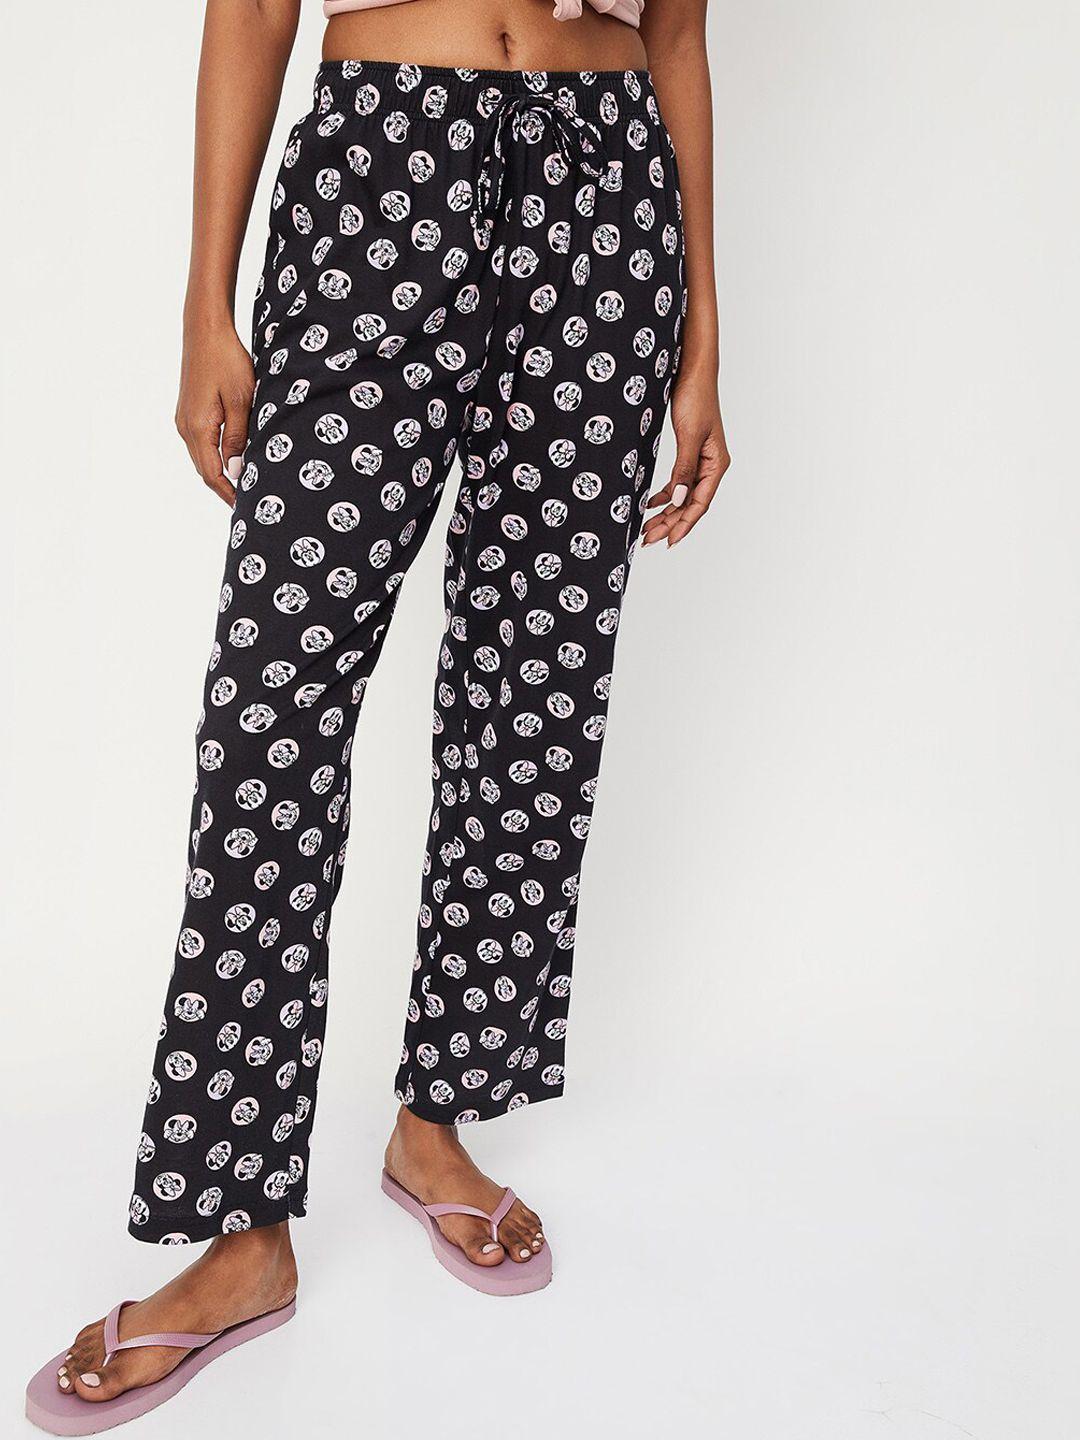 max women minnie mouse printed knit lounge pants